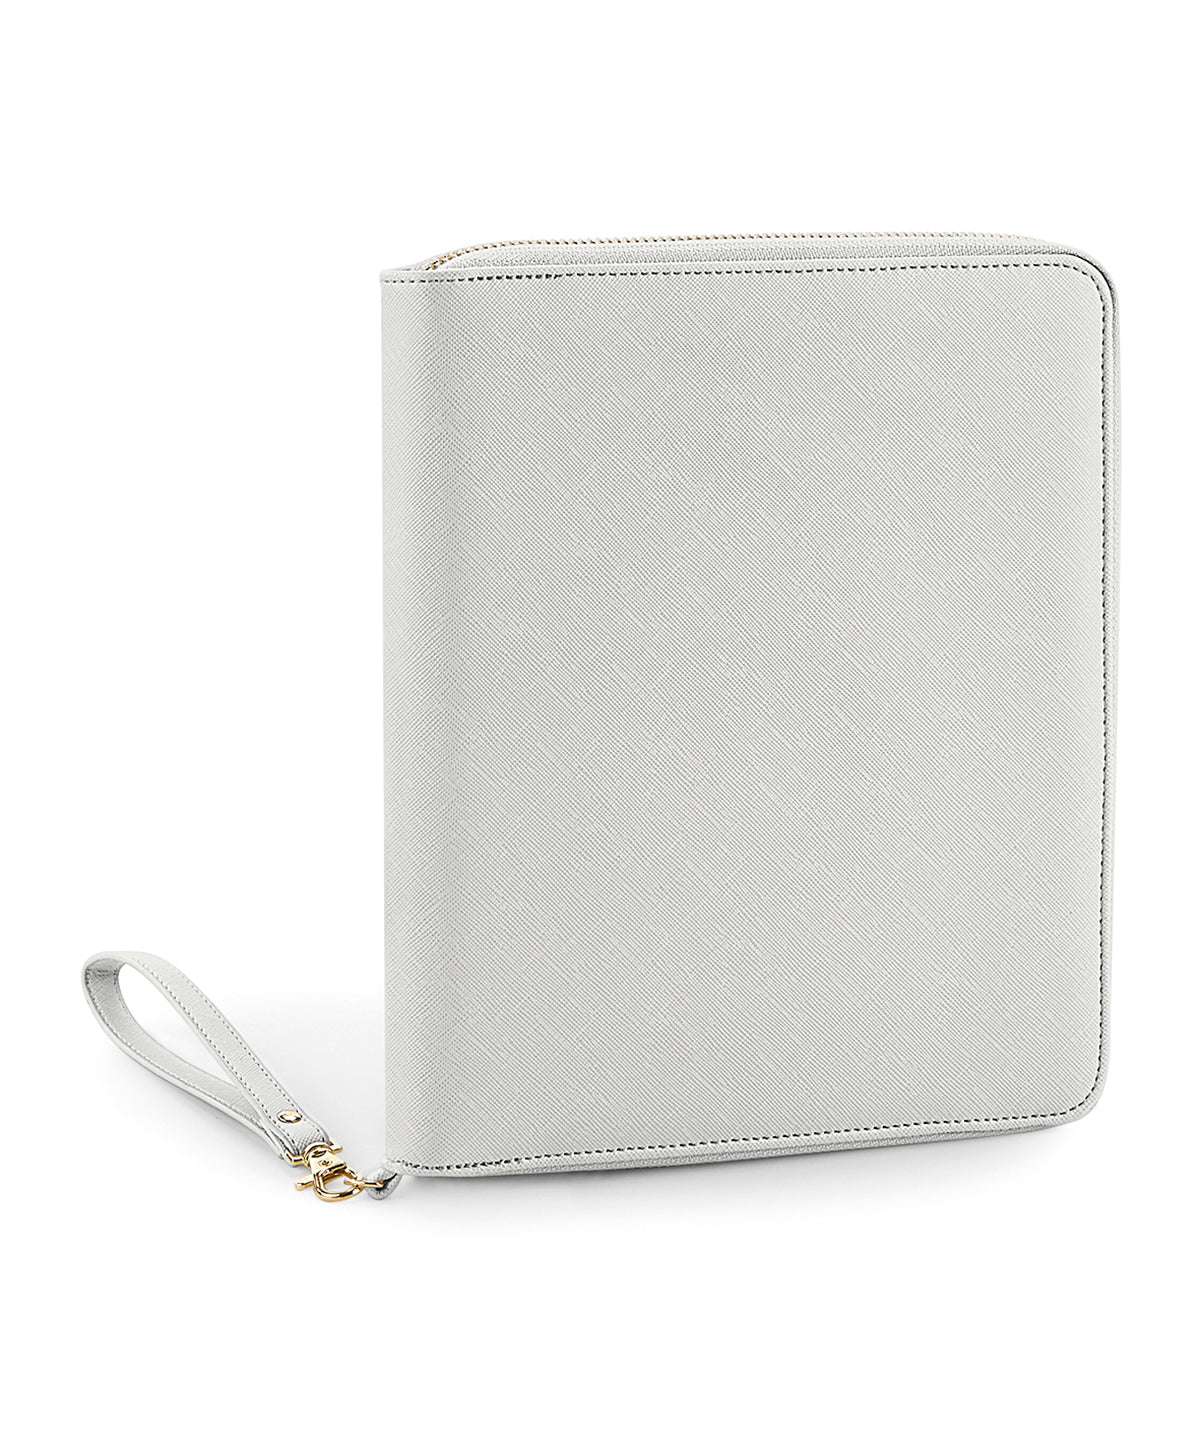 Personalised Bags - Light Grey Bagbase Boutique travel/tech organiser